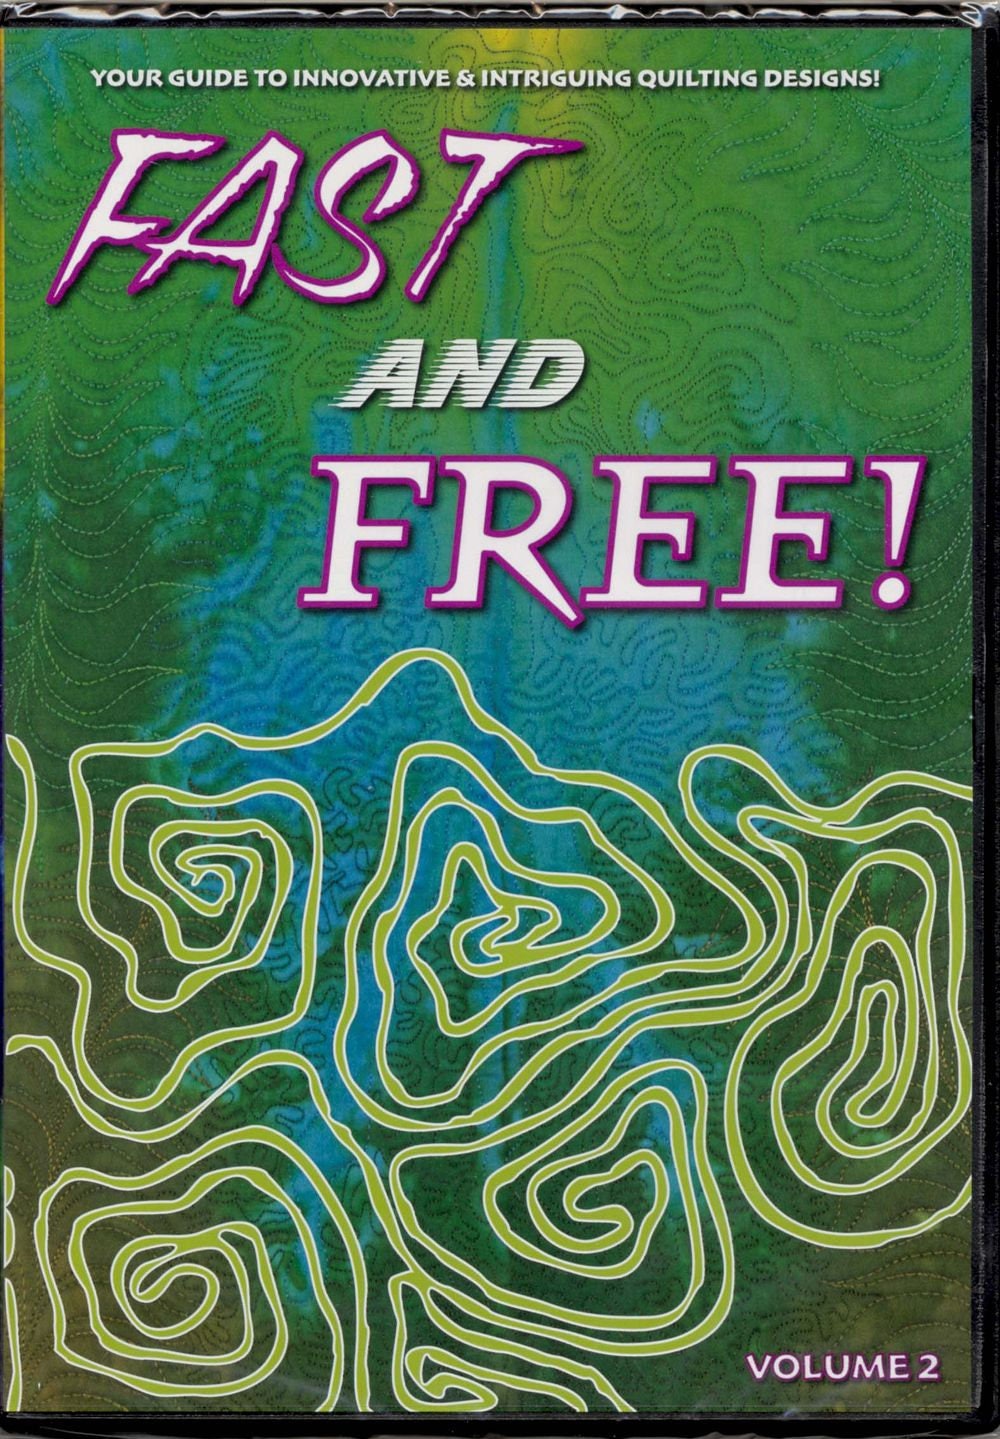 Fast And Free Volume 2 Machine Quilting Video on DVD with Patsy Thompson for Patsy Thompson Designs